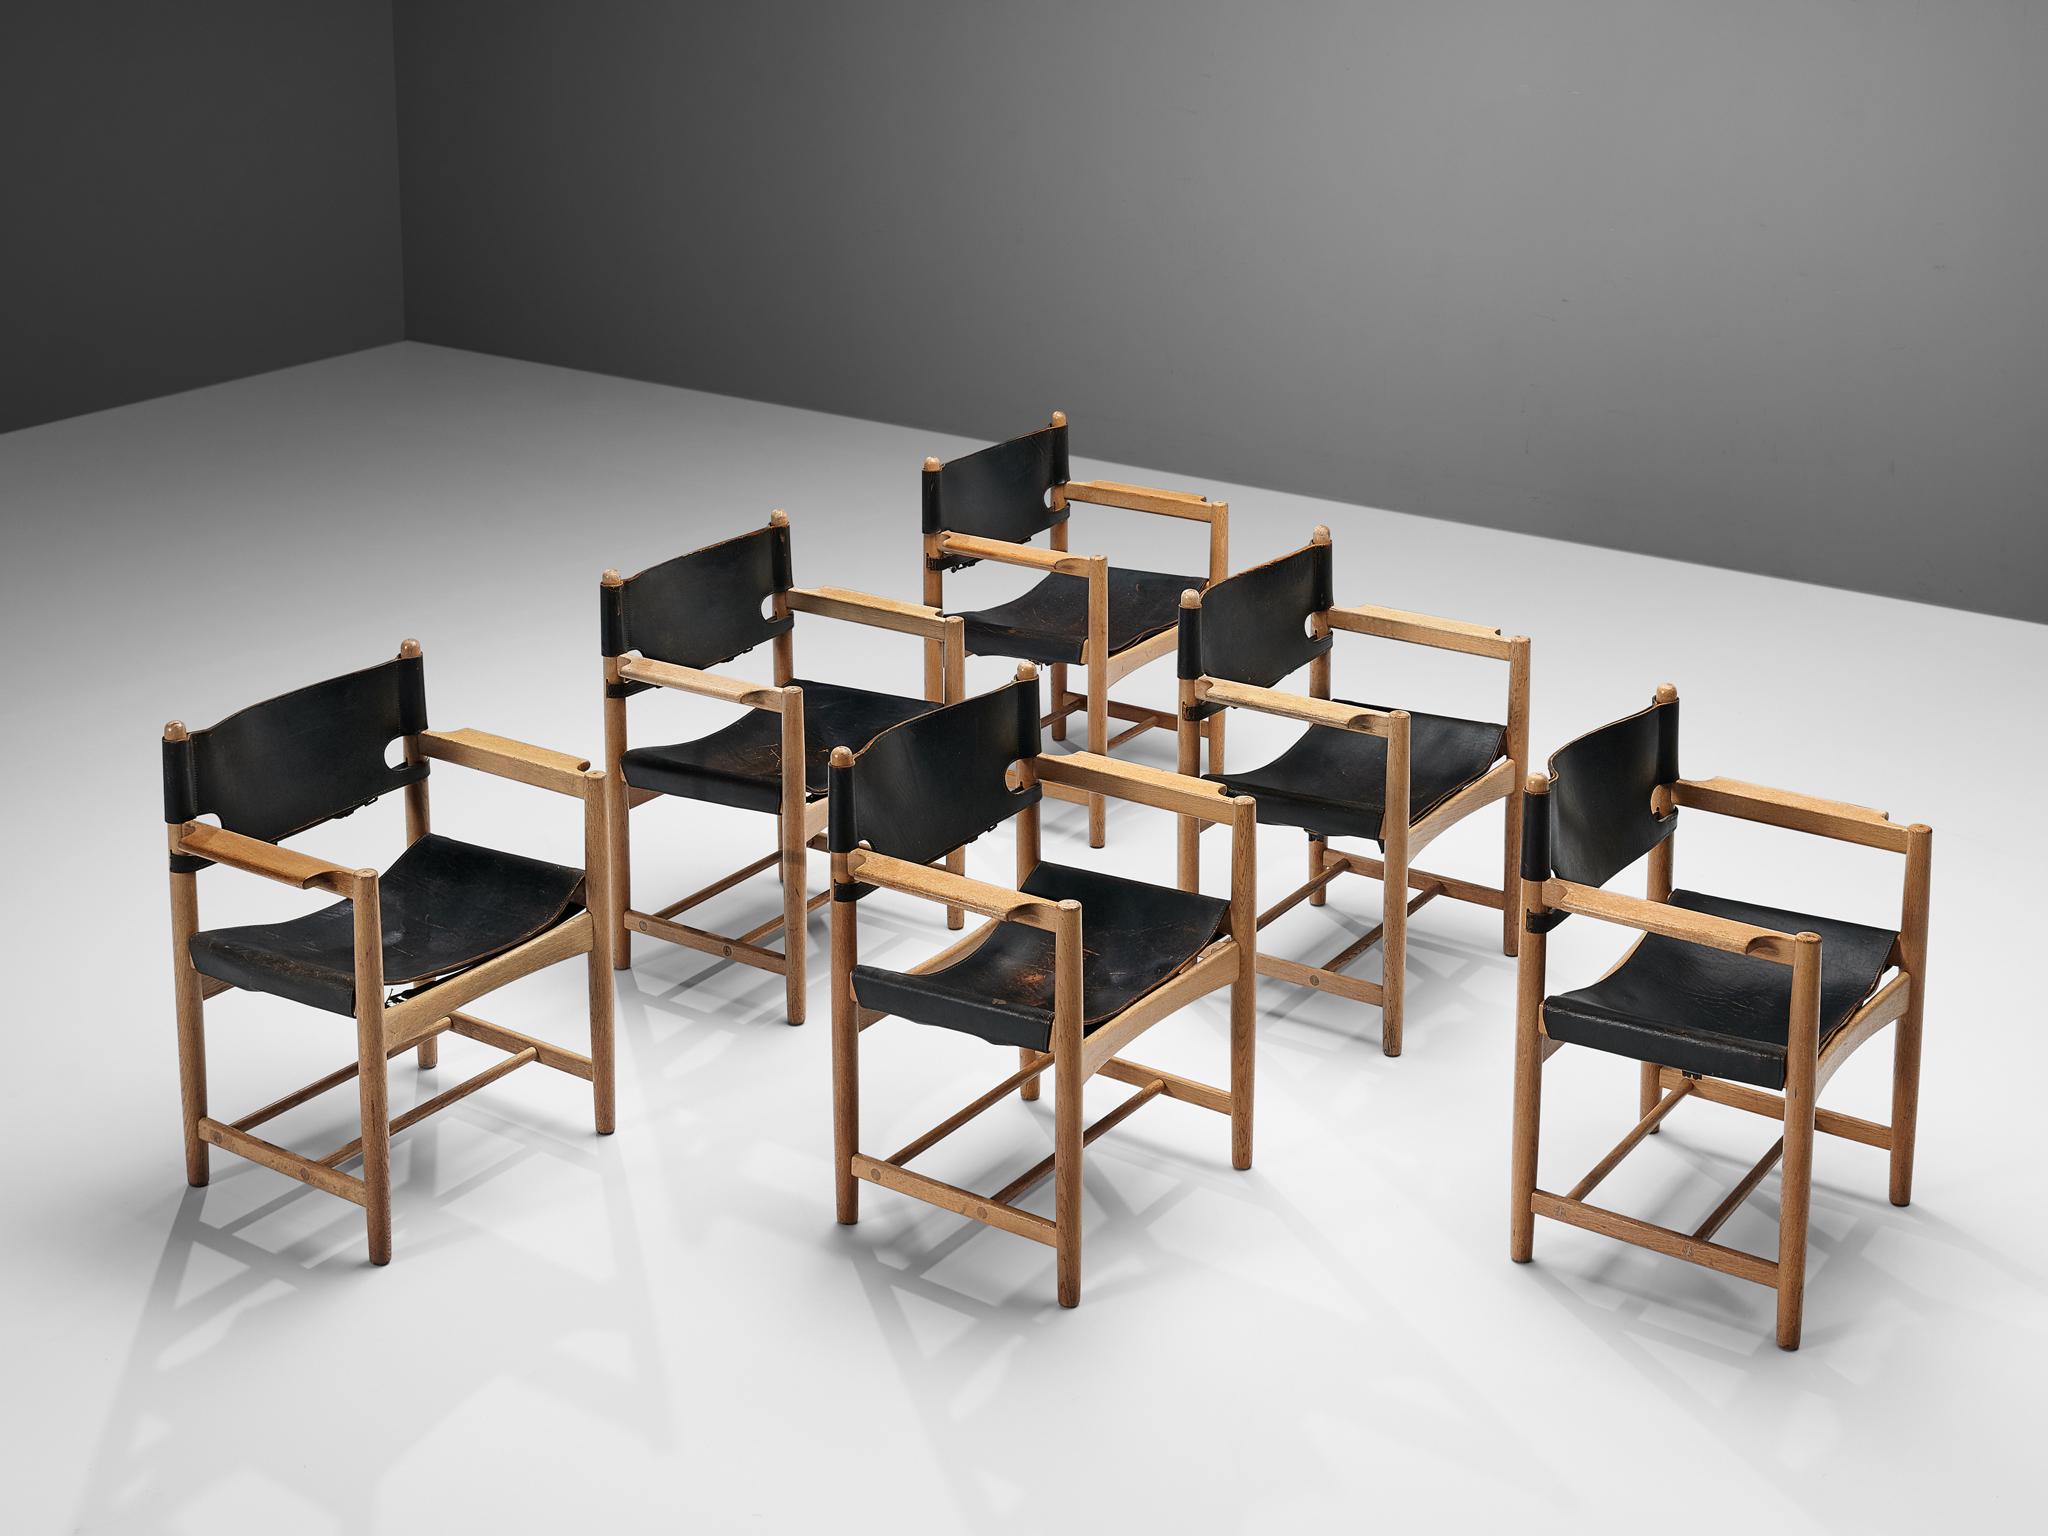 Børge Mogensen for Fredericia Stolefabrik, set of six 'Spanish Dining Chairs' model 3238, oak, black leather, Denmark, 1964

These chairs remind of the classical foldable 'director-chairs', yet this design by Danish designer Børge Mogensen